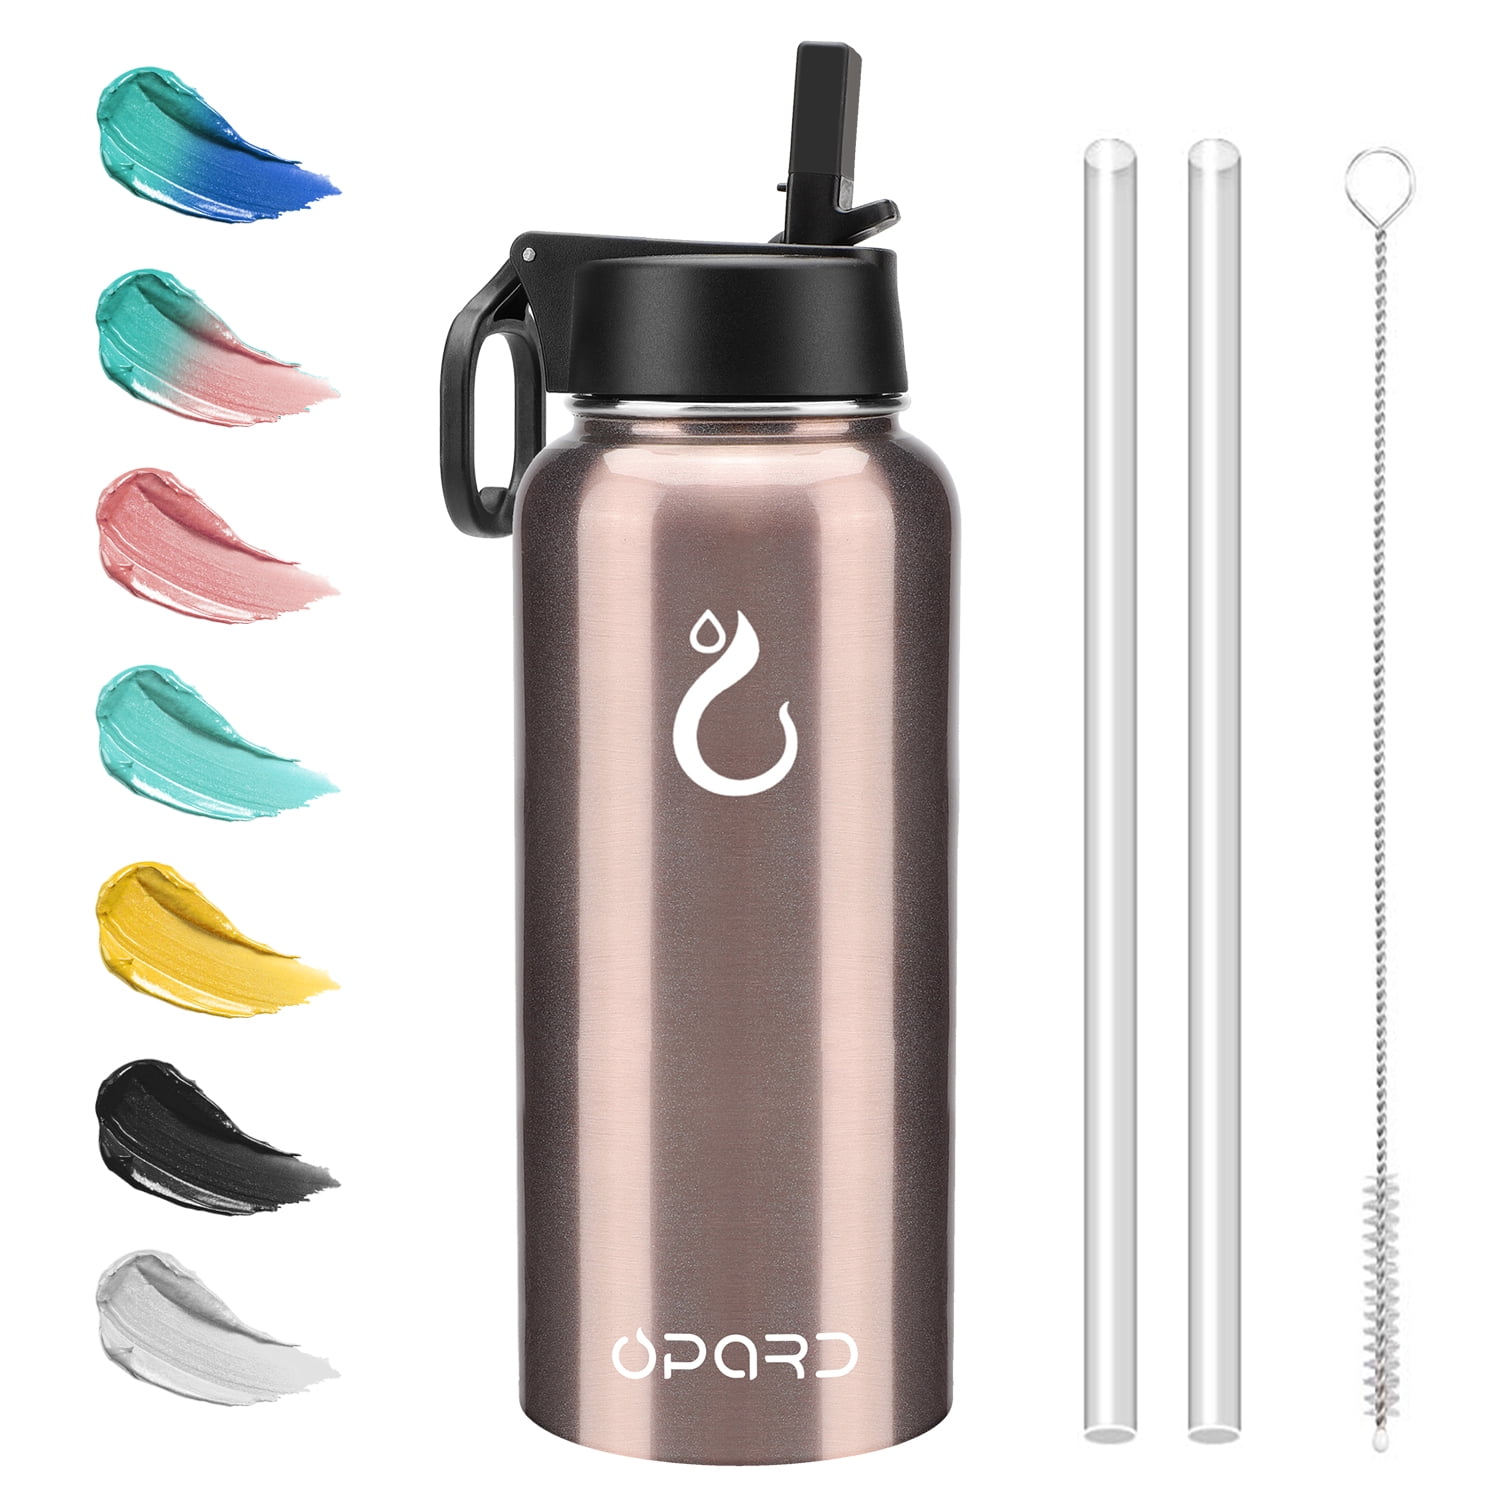 NUVISSO The Enthusiast: Peak Guard - Water Bottle - 32oz - 2 Lids (Straw and Handle), Leak Proof - Stainless Steel Gym Bottle for Men, Women, Double